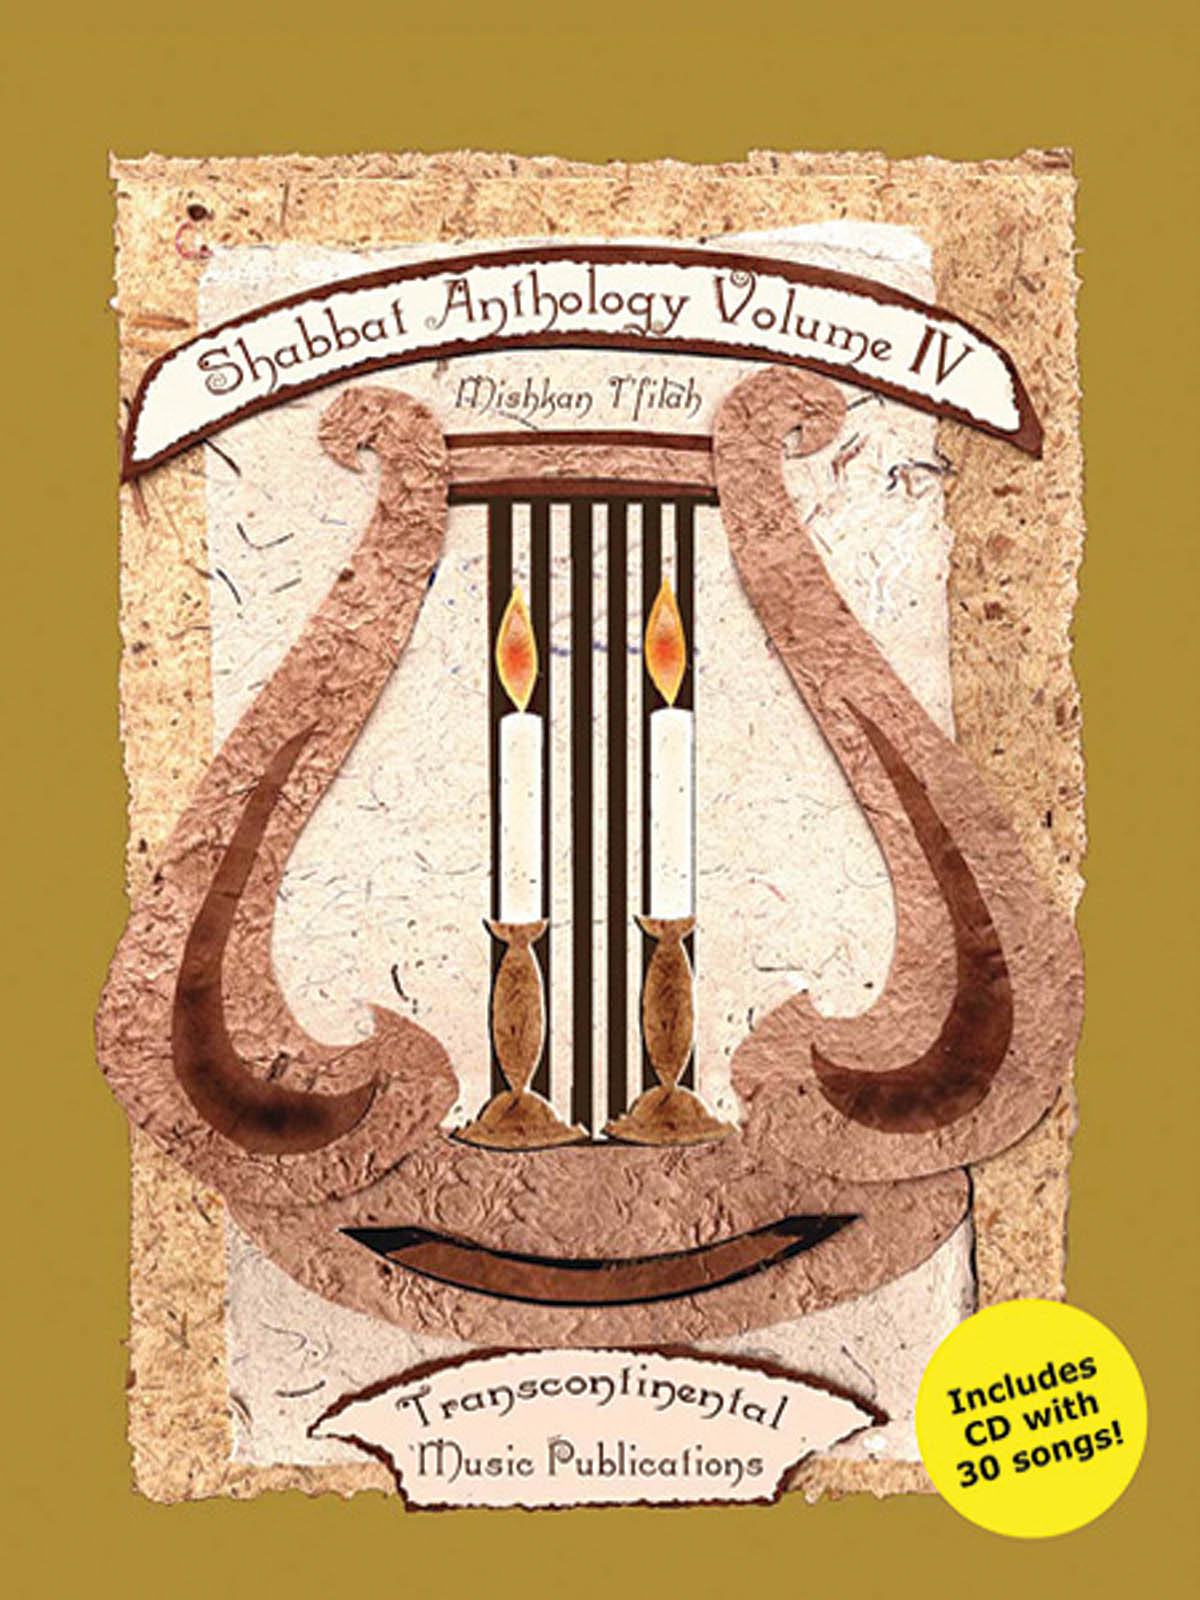 Shabbat Anthology Vol. IV: Piano  Vocal and Guitar: Mixed Songbook